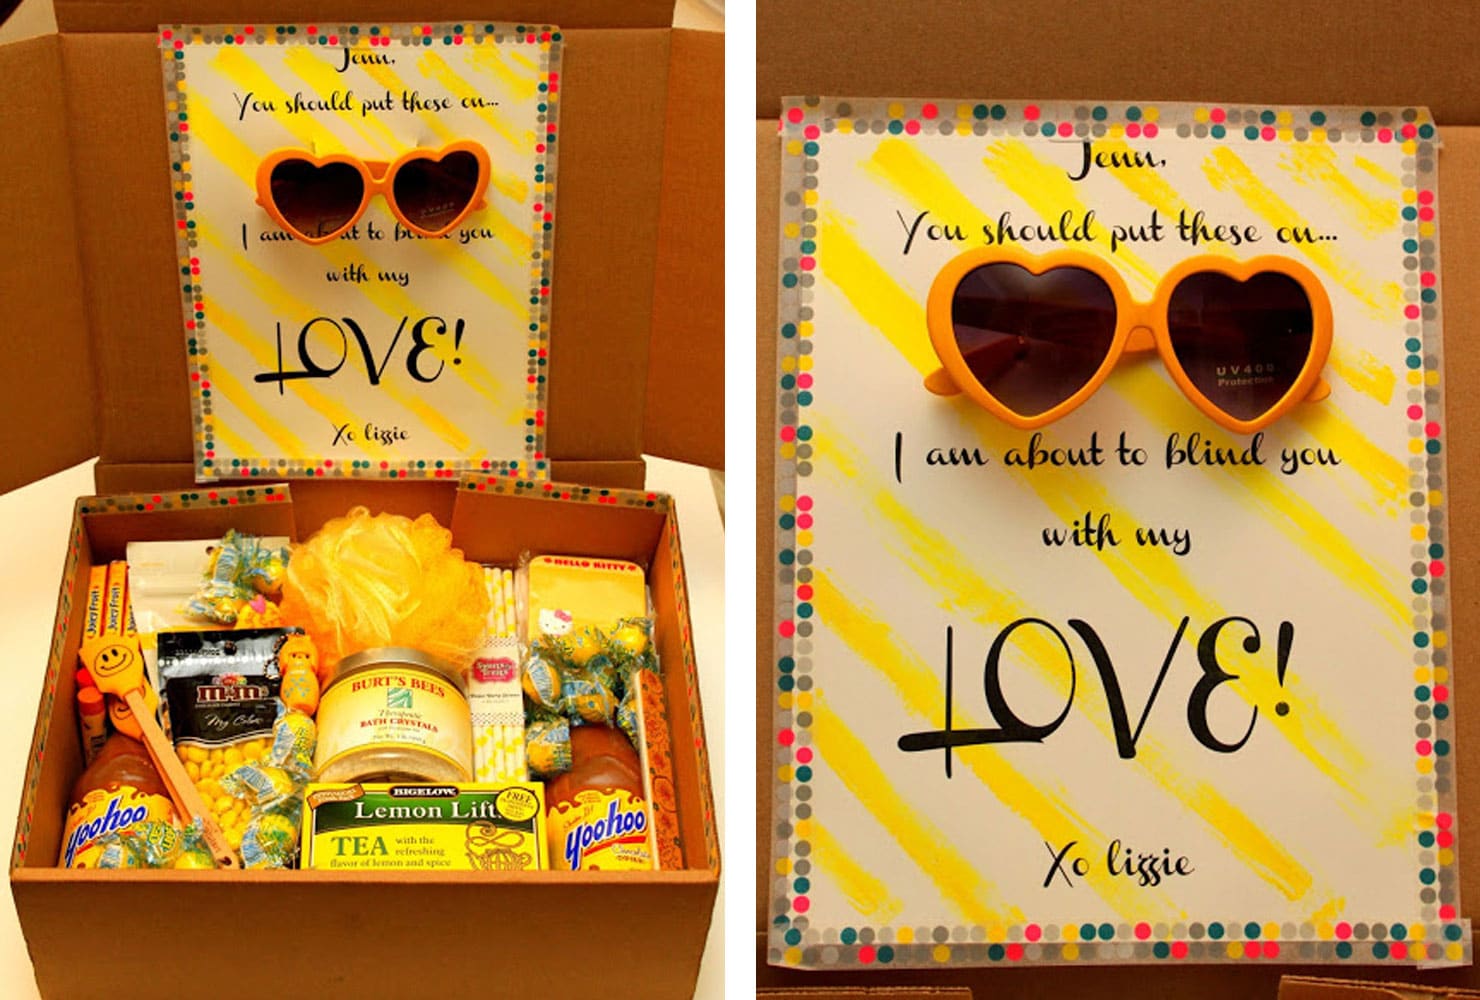 Sunshine-themed care package with yellow items